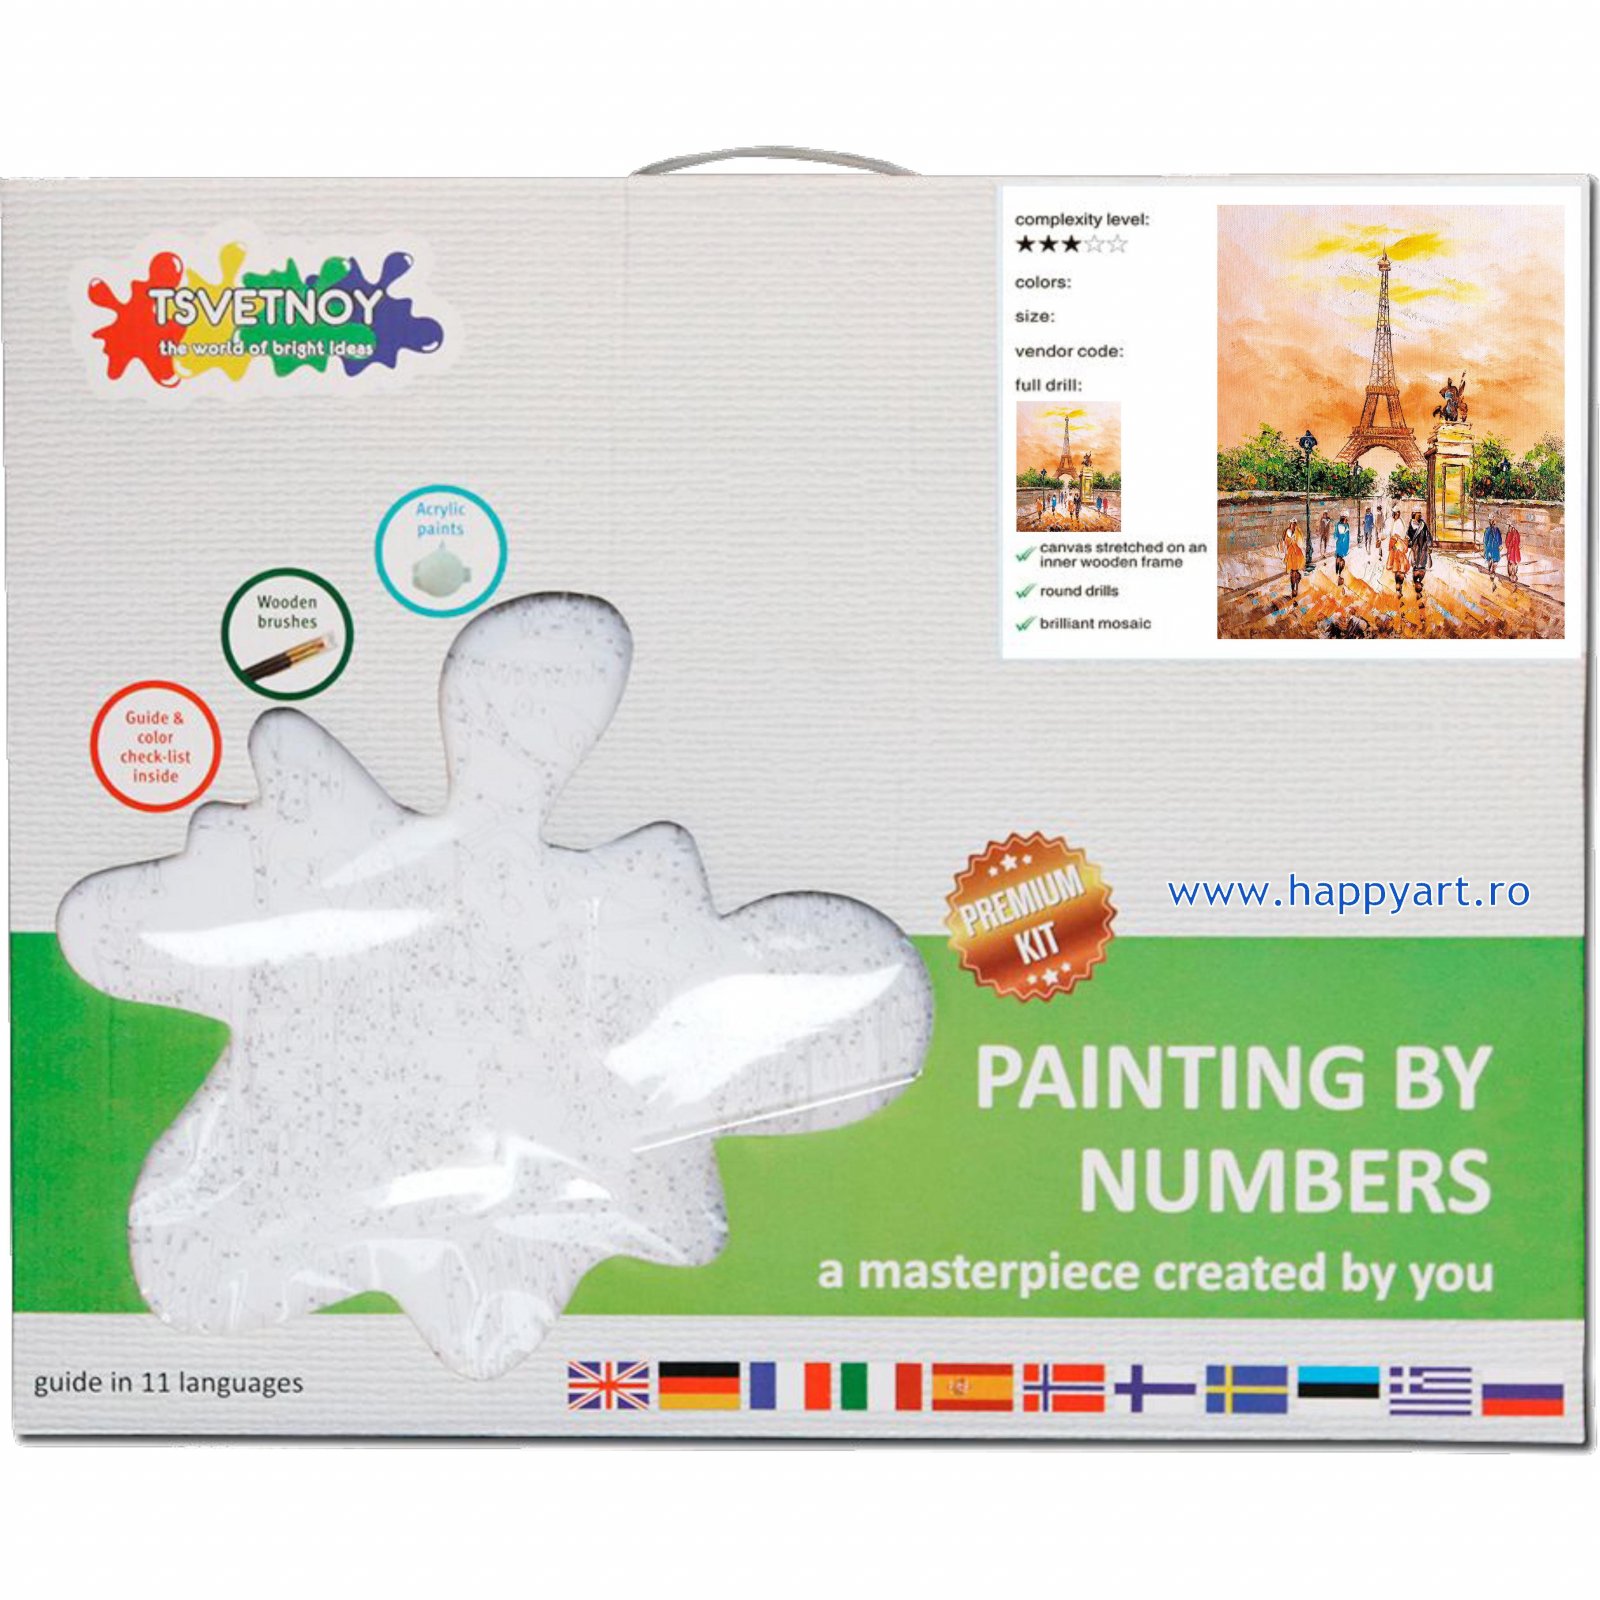 Tsvetnoy - the world of bright ideas Tsvetnoy Paint by Numbers for Adults  Framed - Paint by Number